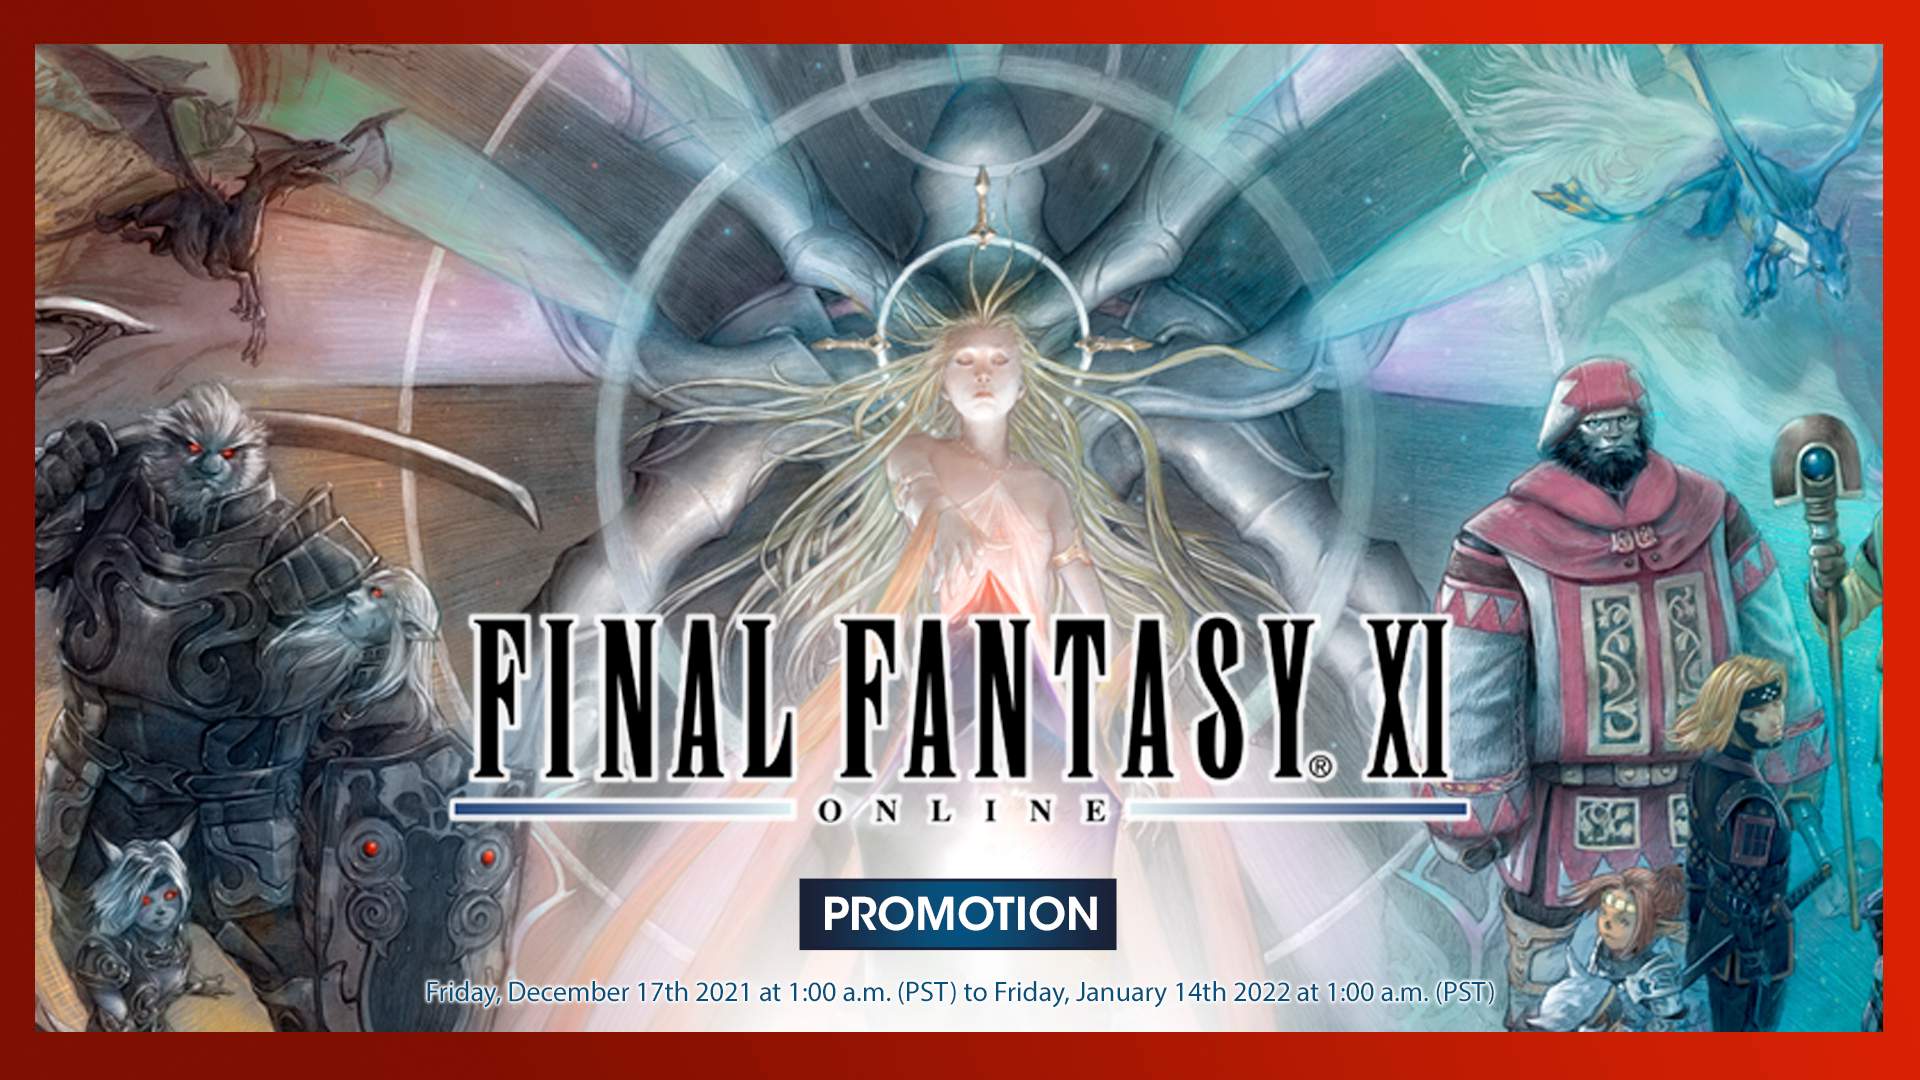 FINAL FANTASY XI - For a limited time, The Ultimate Collection Seekers Edition is $9.99!